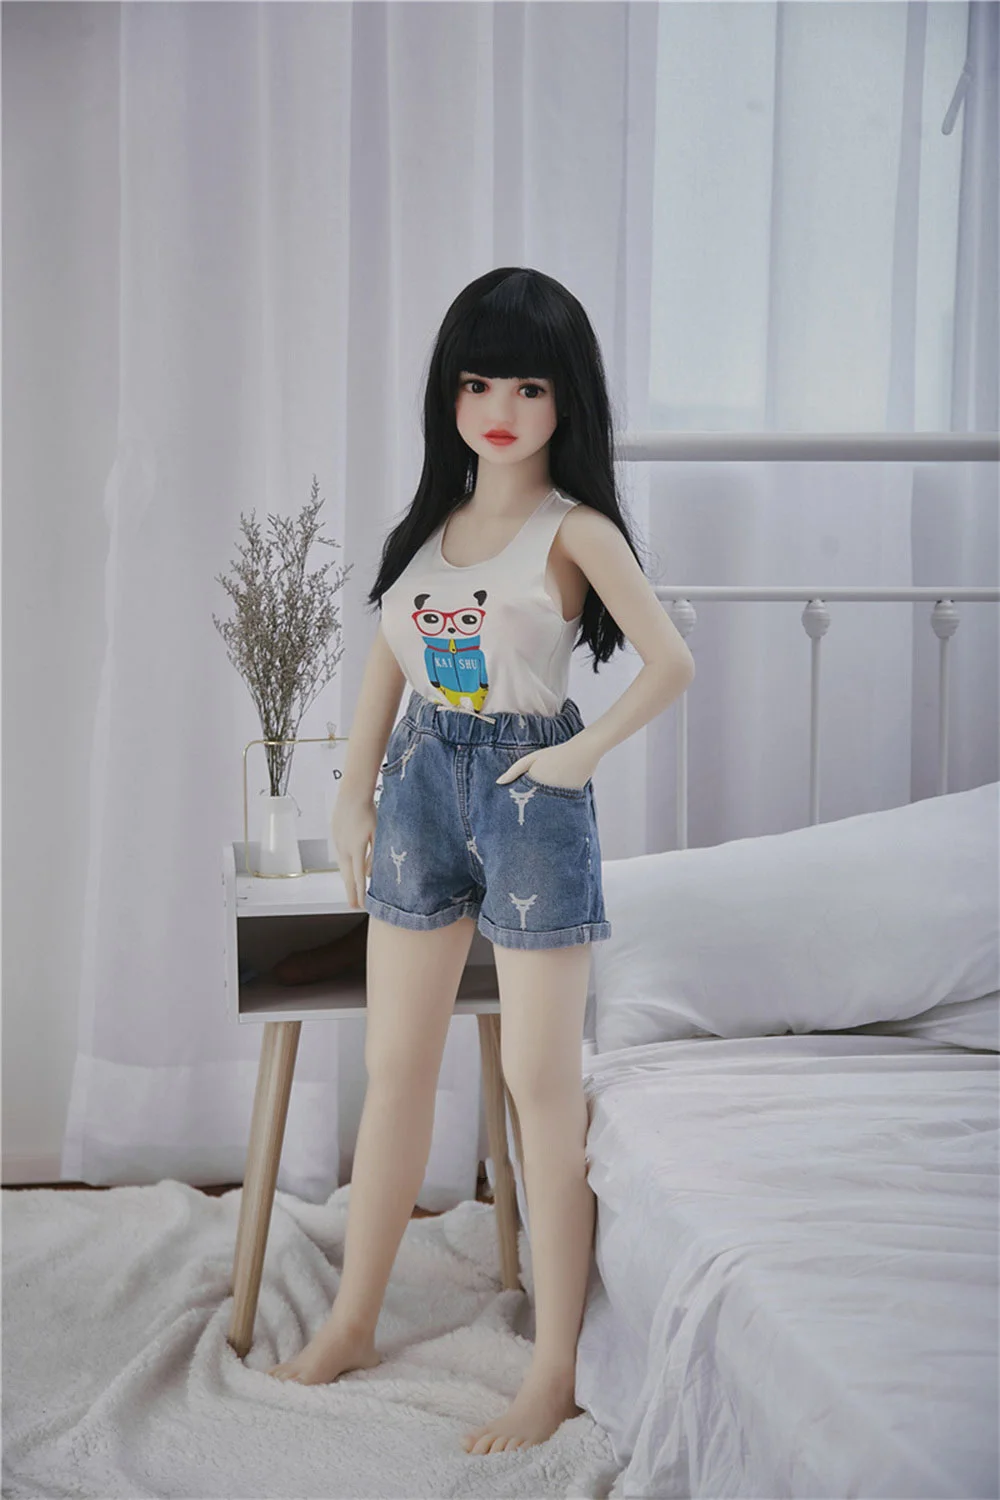 Mini sex doll standing with hands in pockets